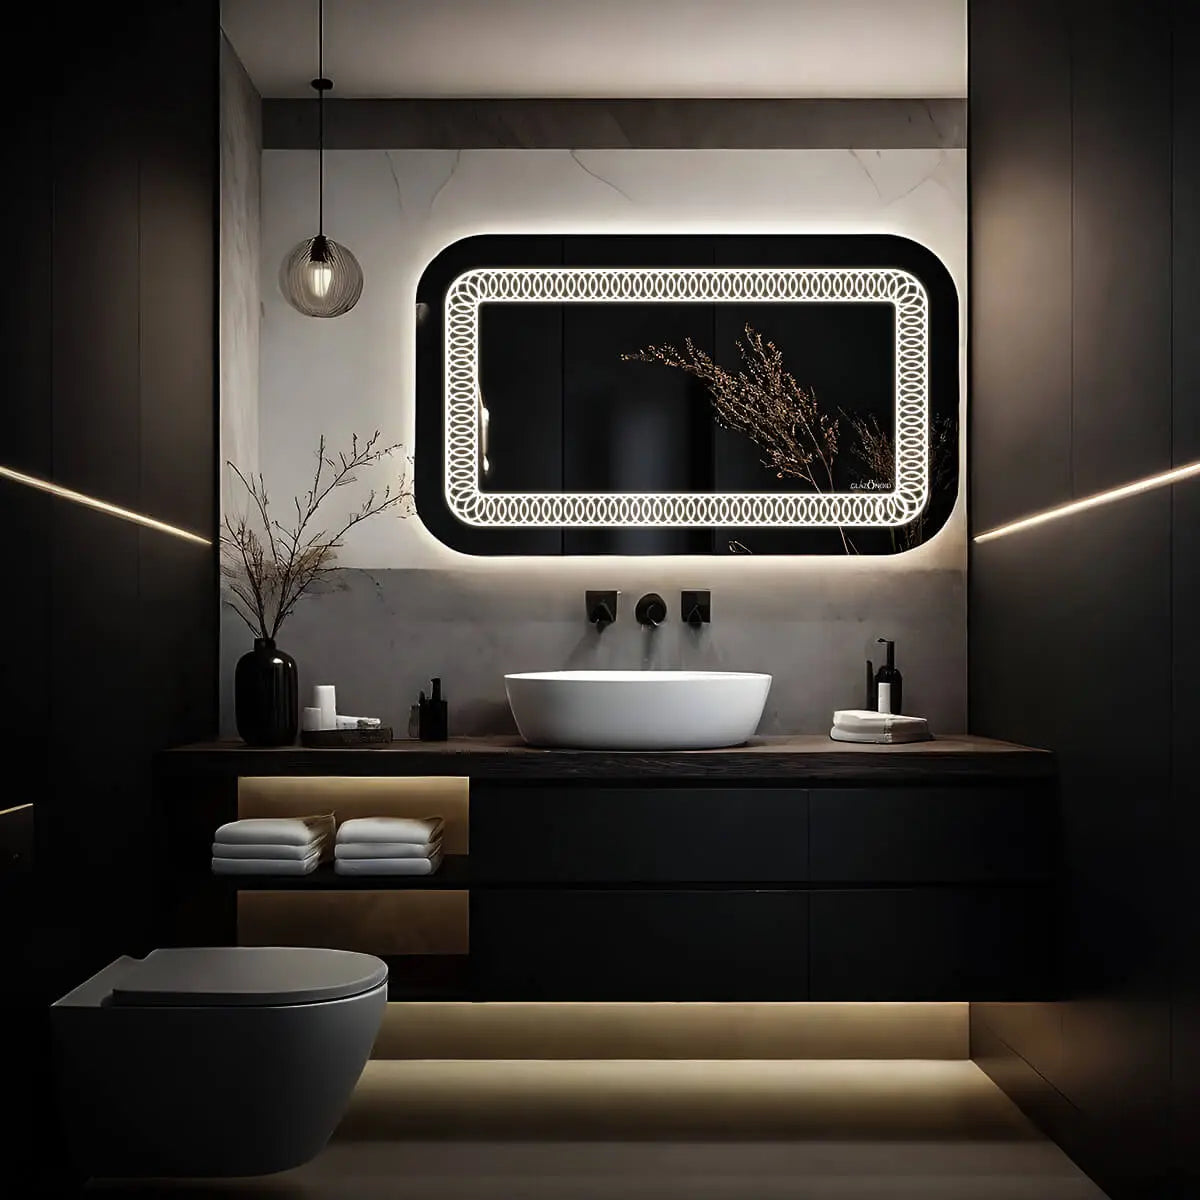 Modern bathroom sink vanity set with a black metal frame, a rectangular mirror with bright white LED light, and a white ceramic sink with a chrome faucet. This modern vanity set is perfect for a quick bathroom refresh. This vanity set provides both style and function for your bathroom.